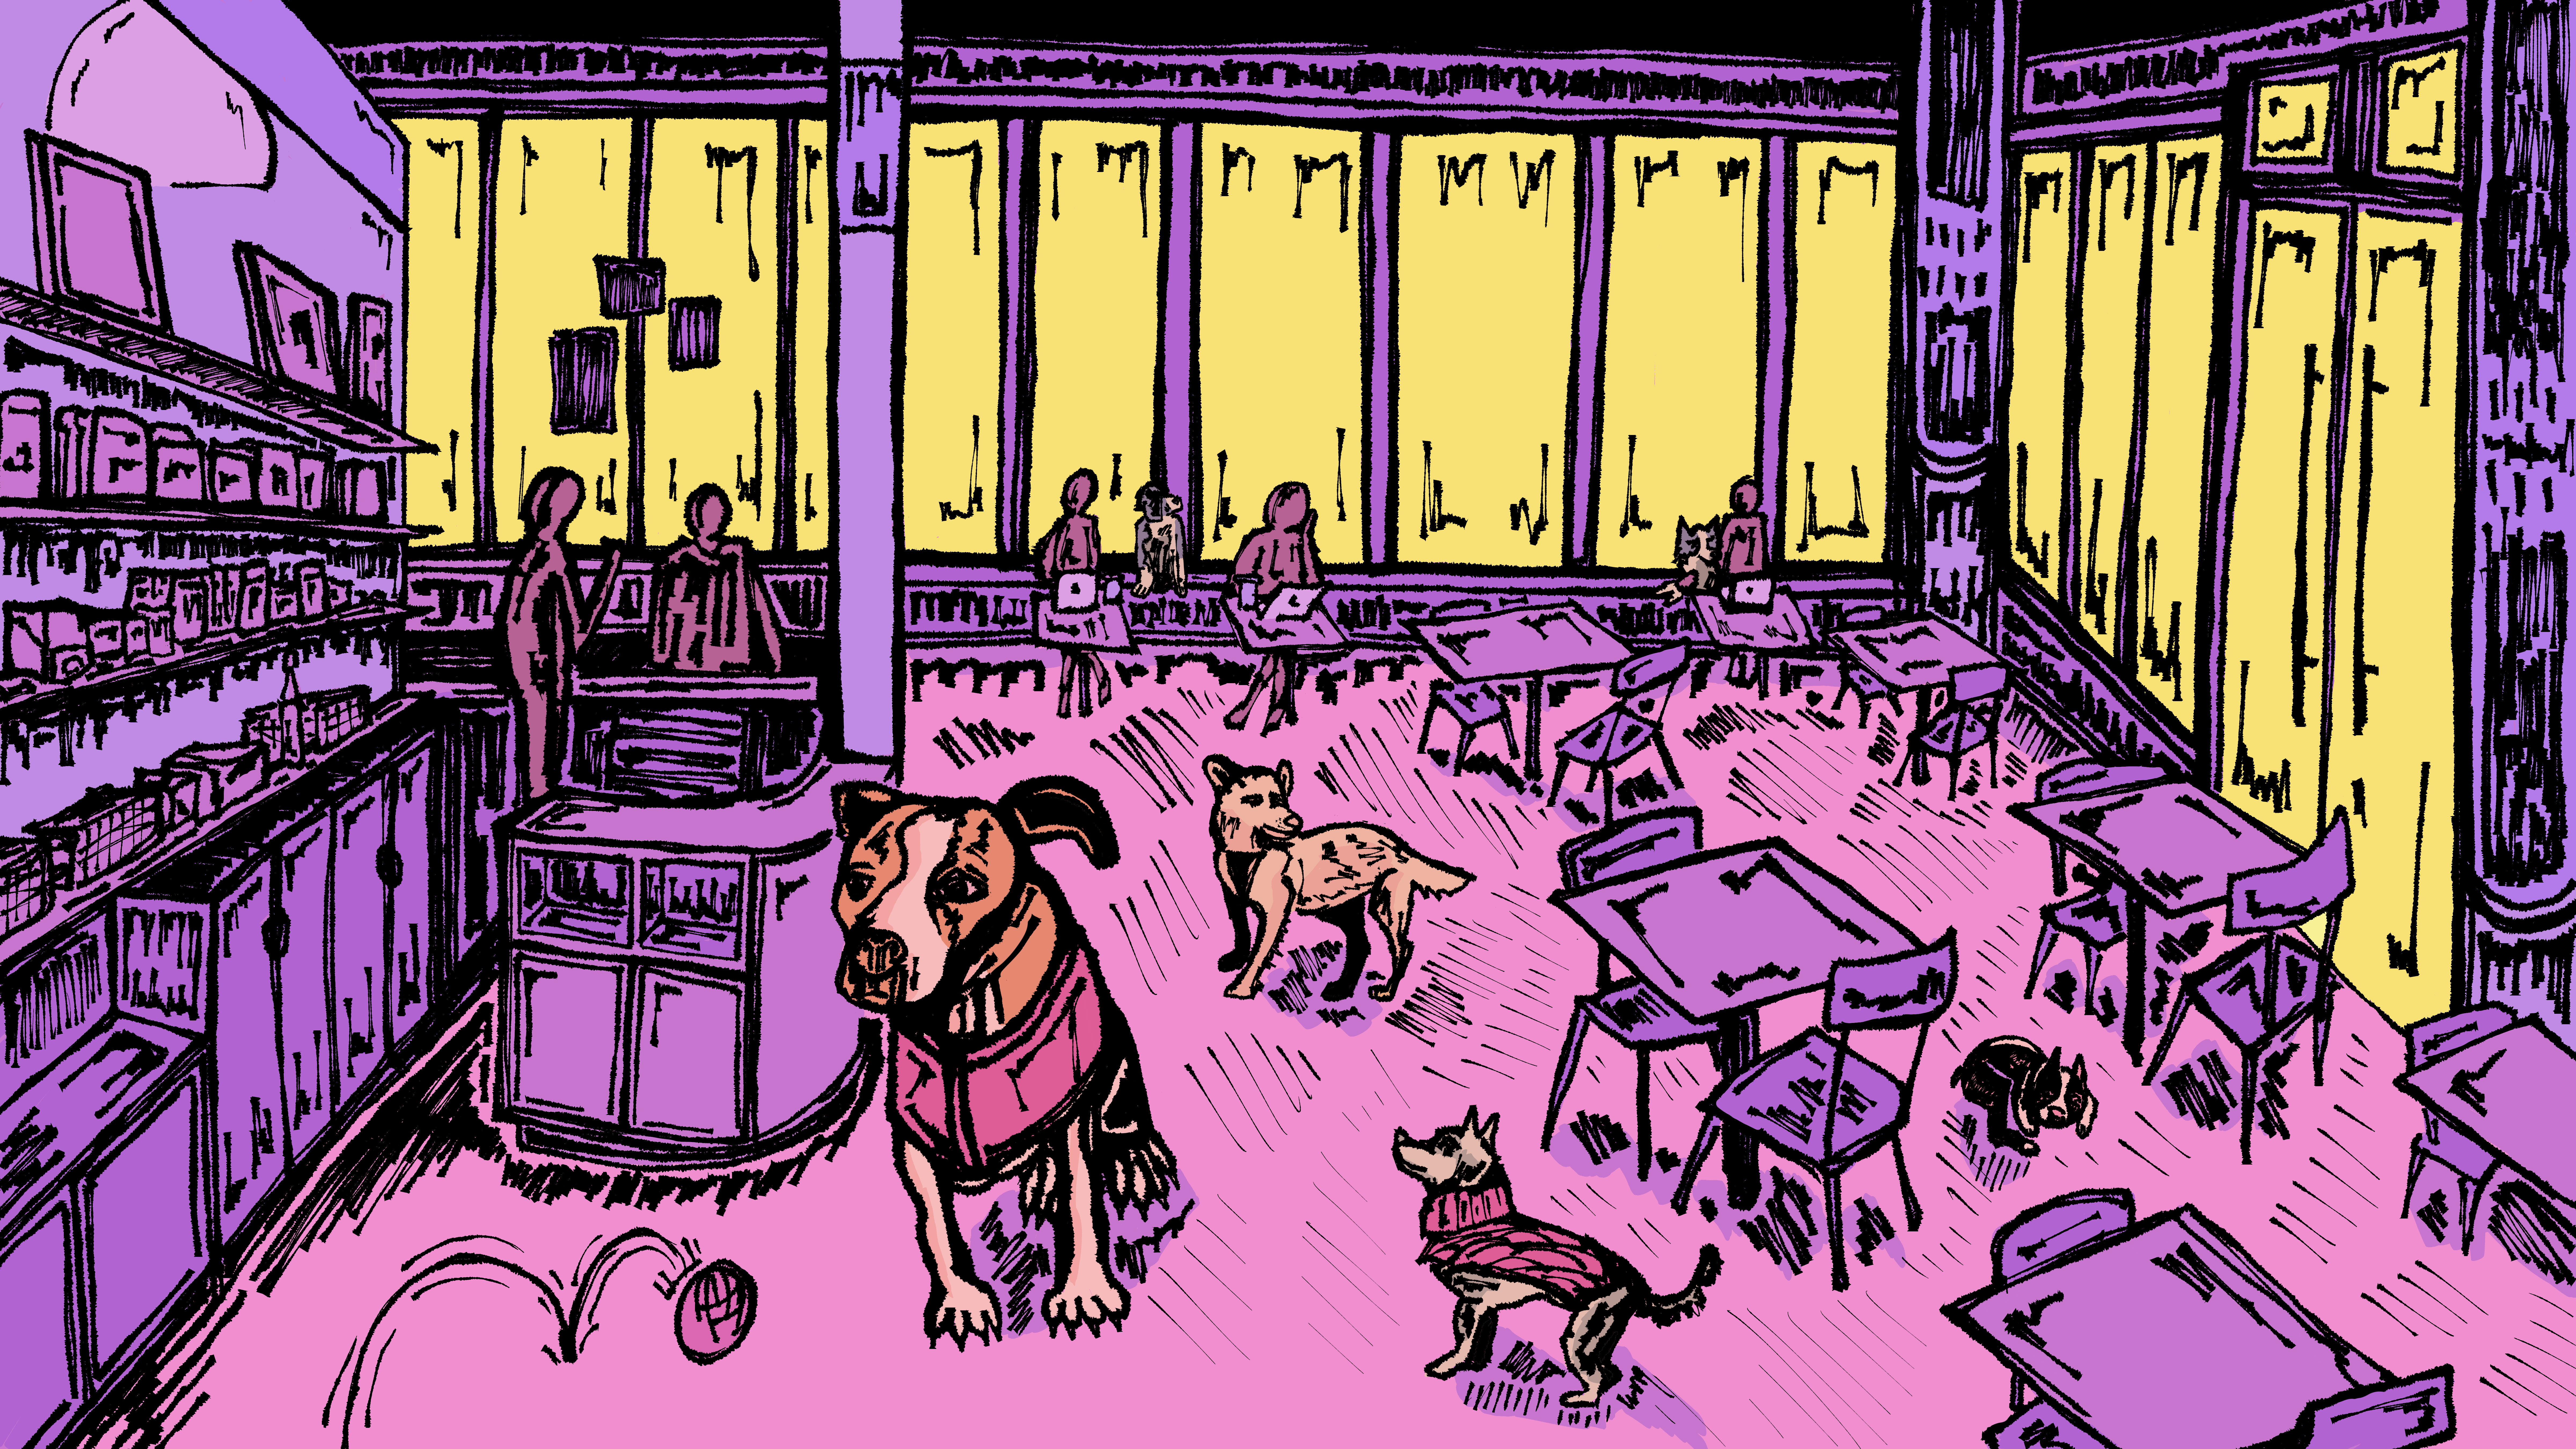 Illustration of Boris & Horton cafe interior with people working at tables and dogs spread through the space — washed in pinks, purples, and yellow.